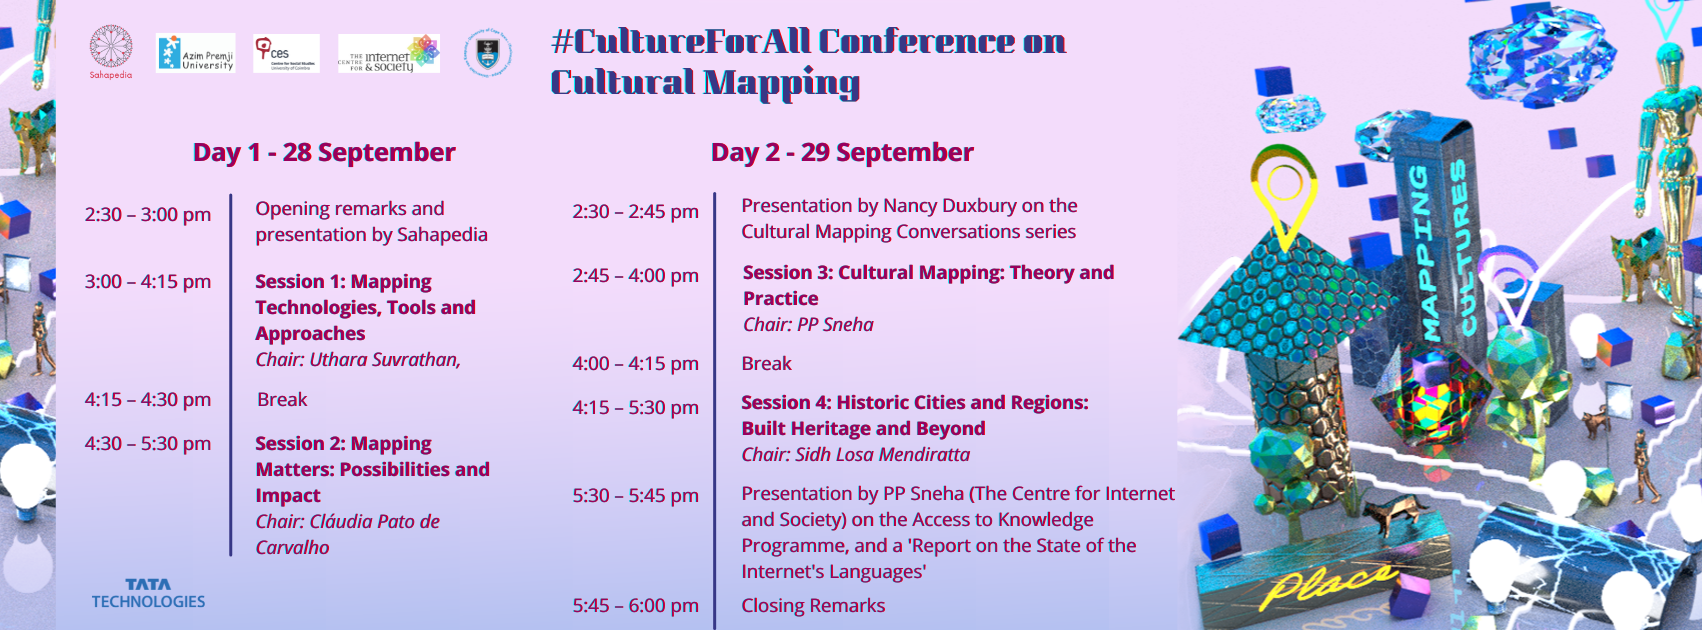  #CultureForAll Conference on Cultural Mapping